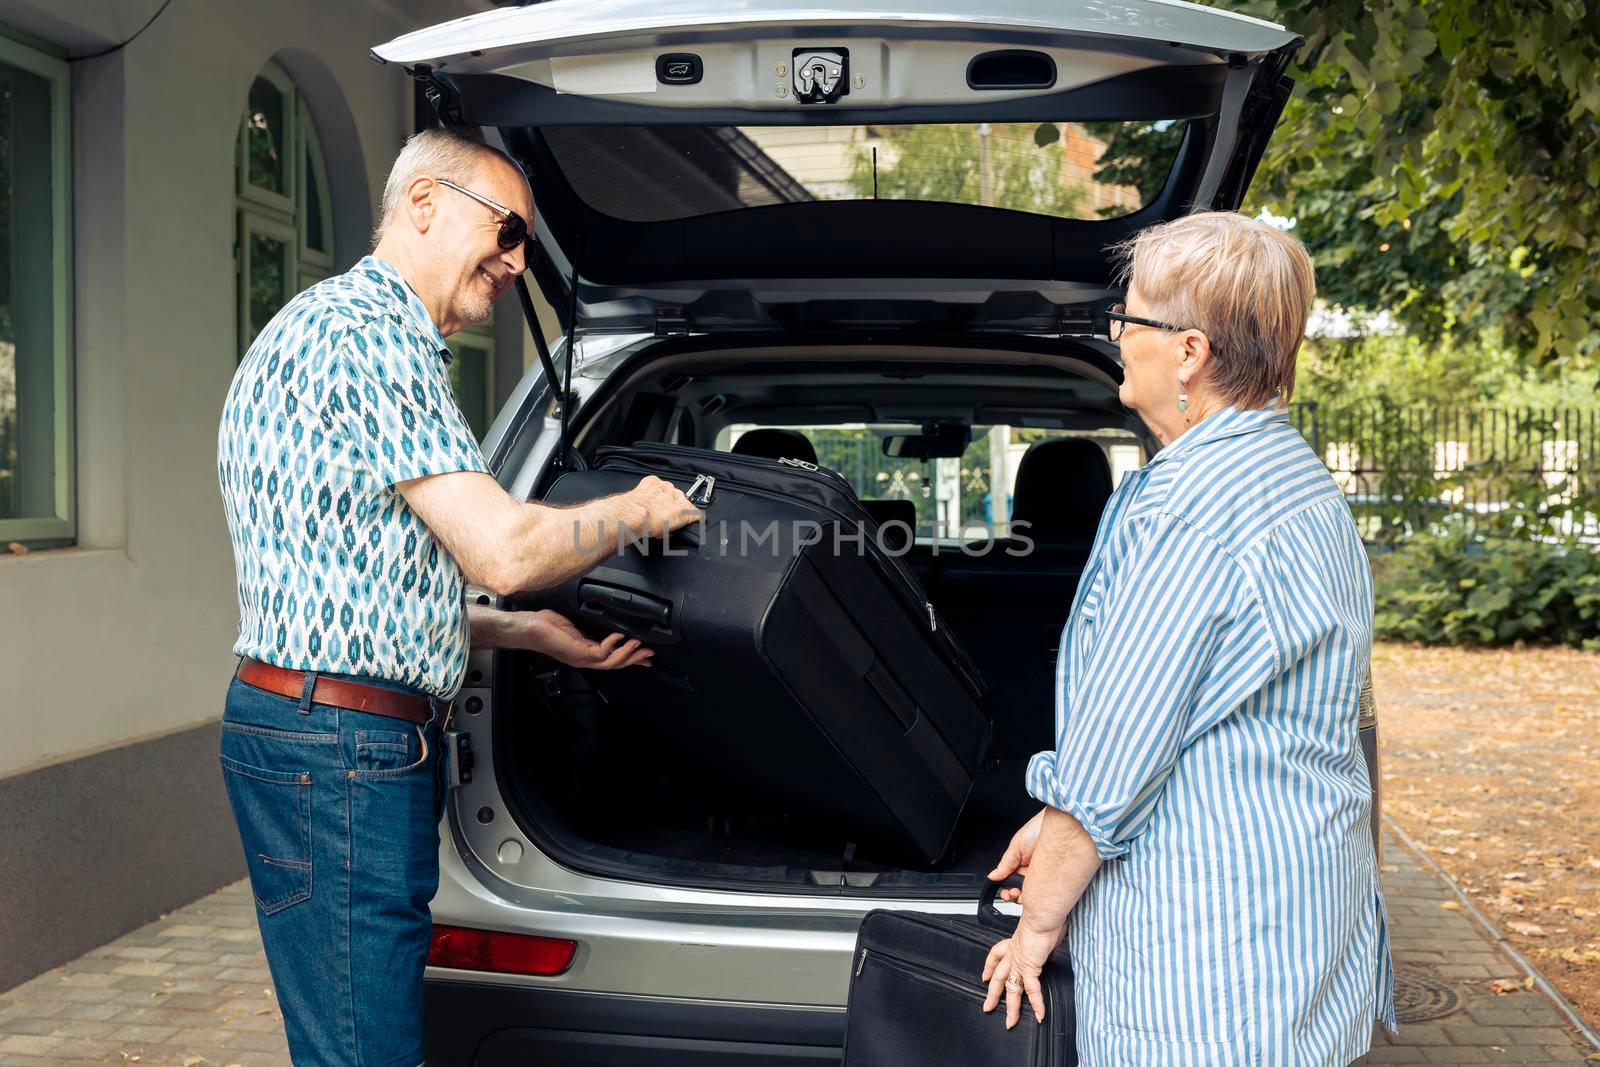 Aged couple putting bags in vehicle trunk to leave on retirement holiday trip during summer. Travelling on road trip for recreation, packing baggage and suitcase for urban cityscape vacation.